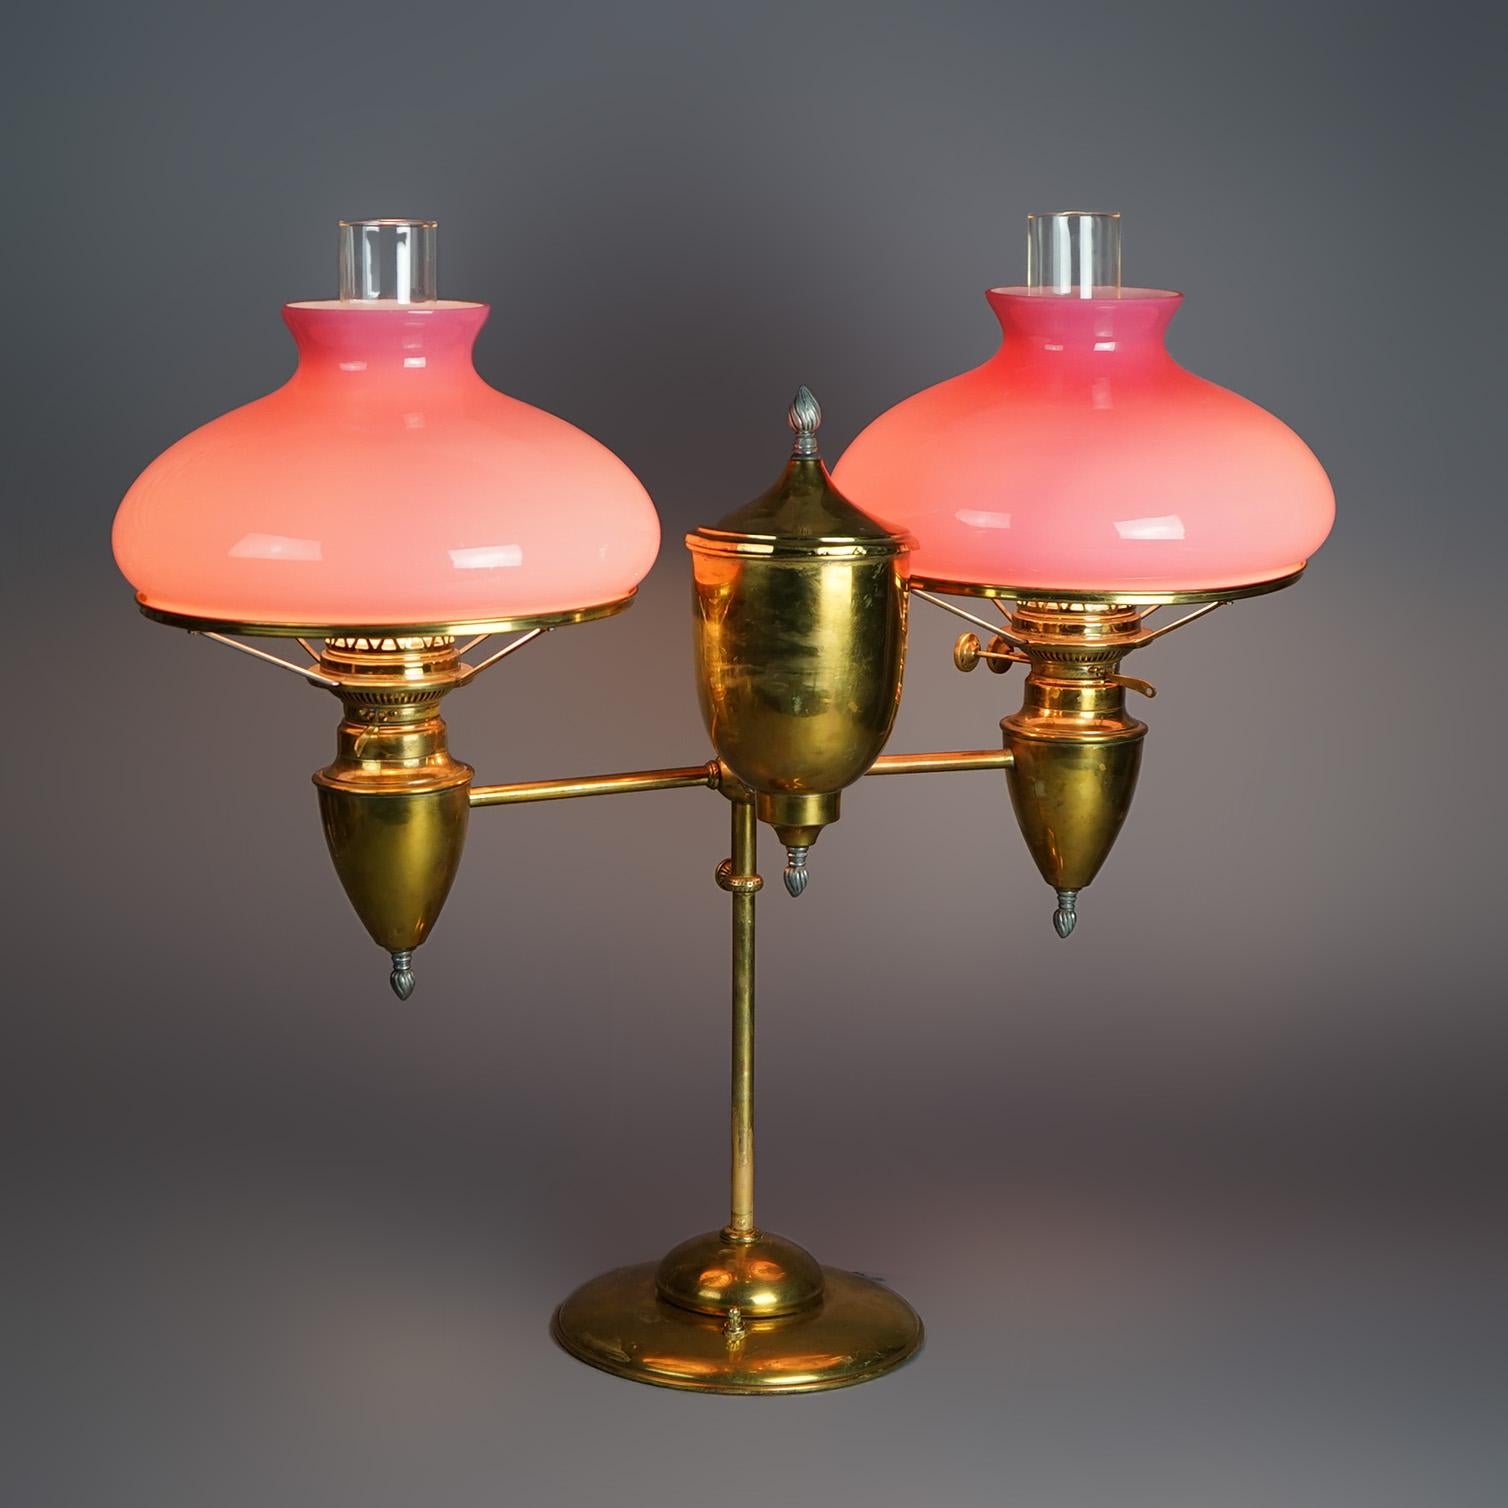 American Antique Bradley & Hubbard Brass Double Student Lamp with Pink Shades c1880 For Sale